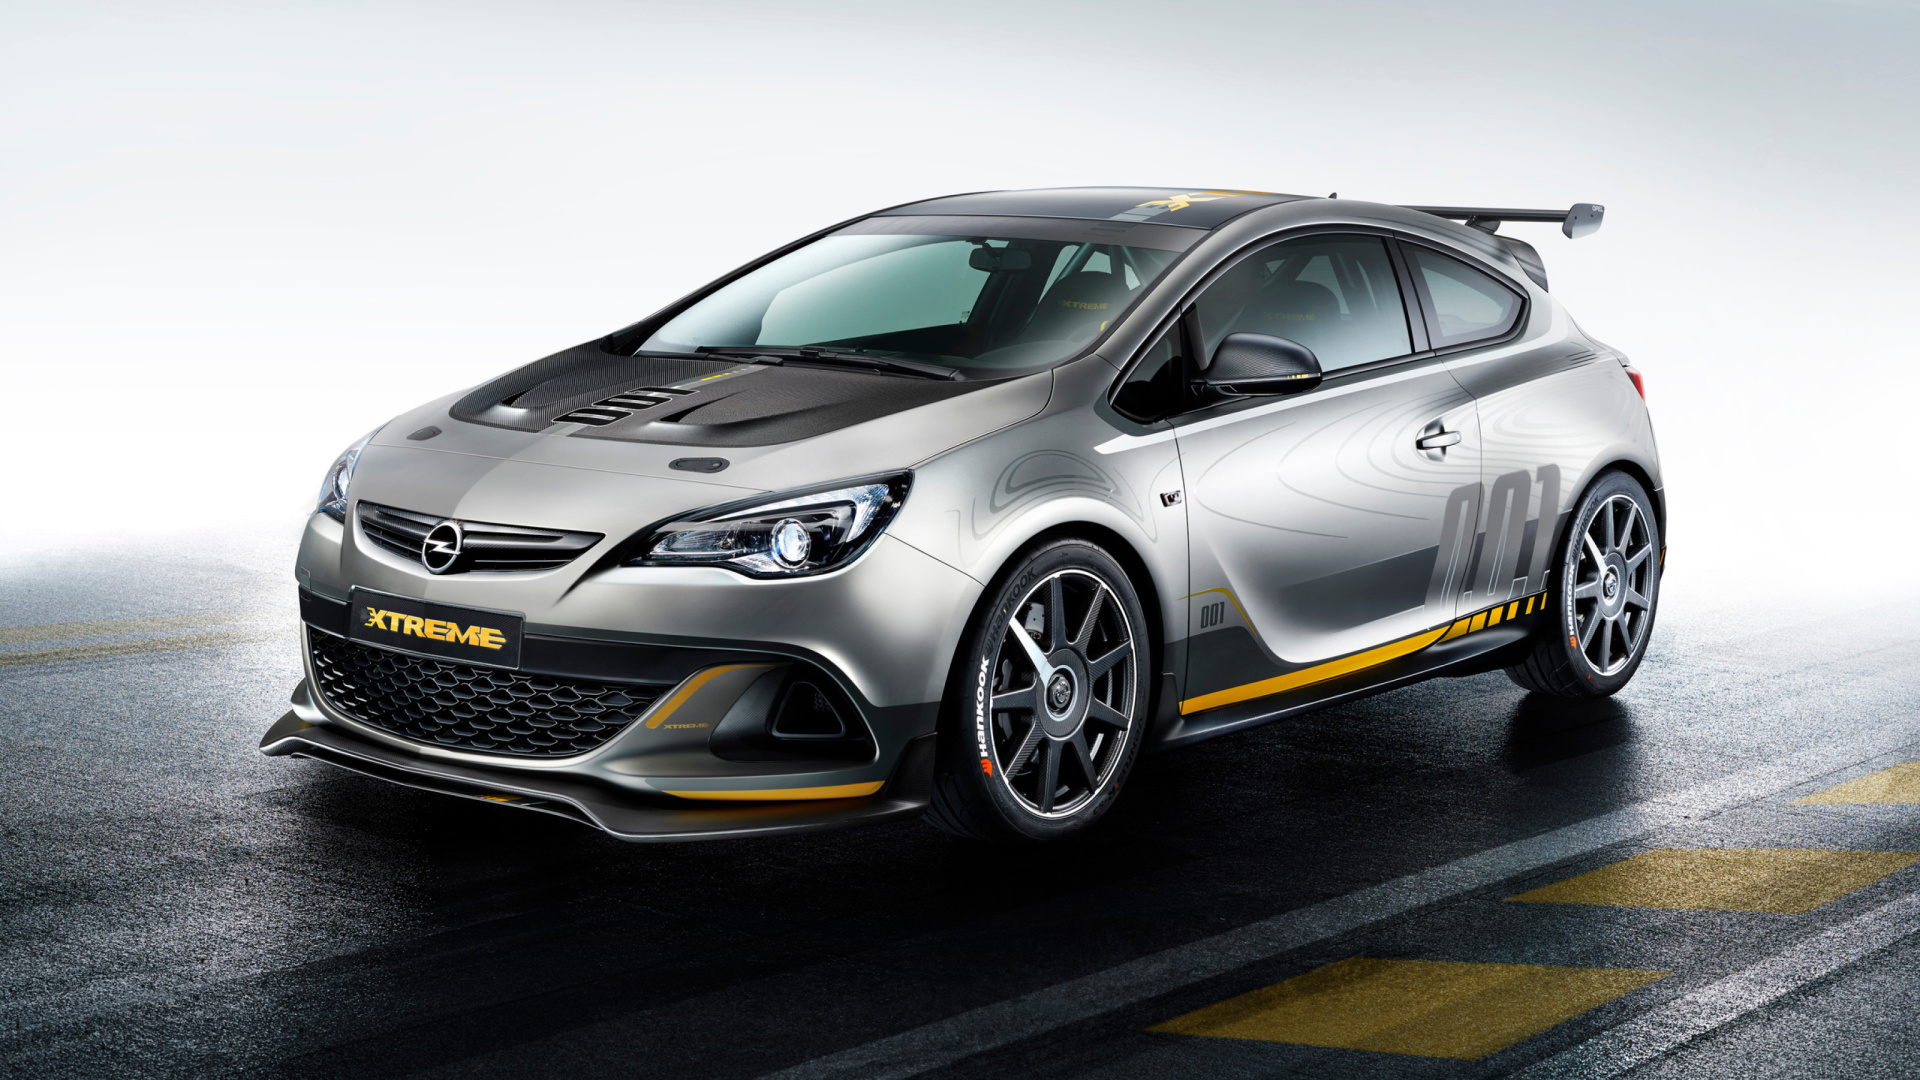 Opel Astra OPC Extreme wallpaper 1920x1080